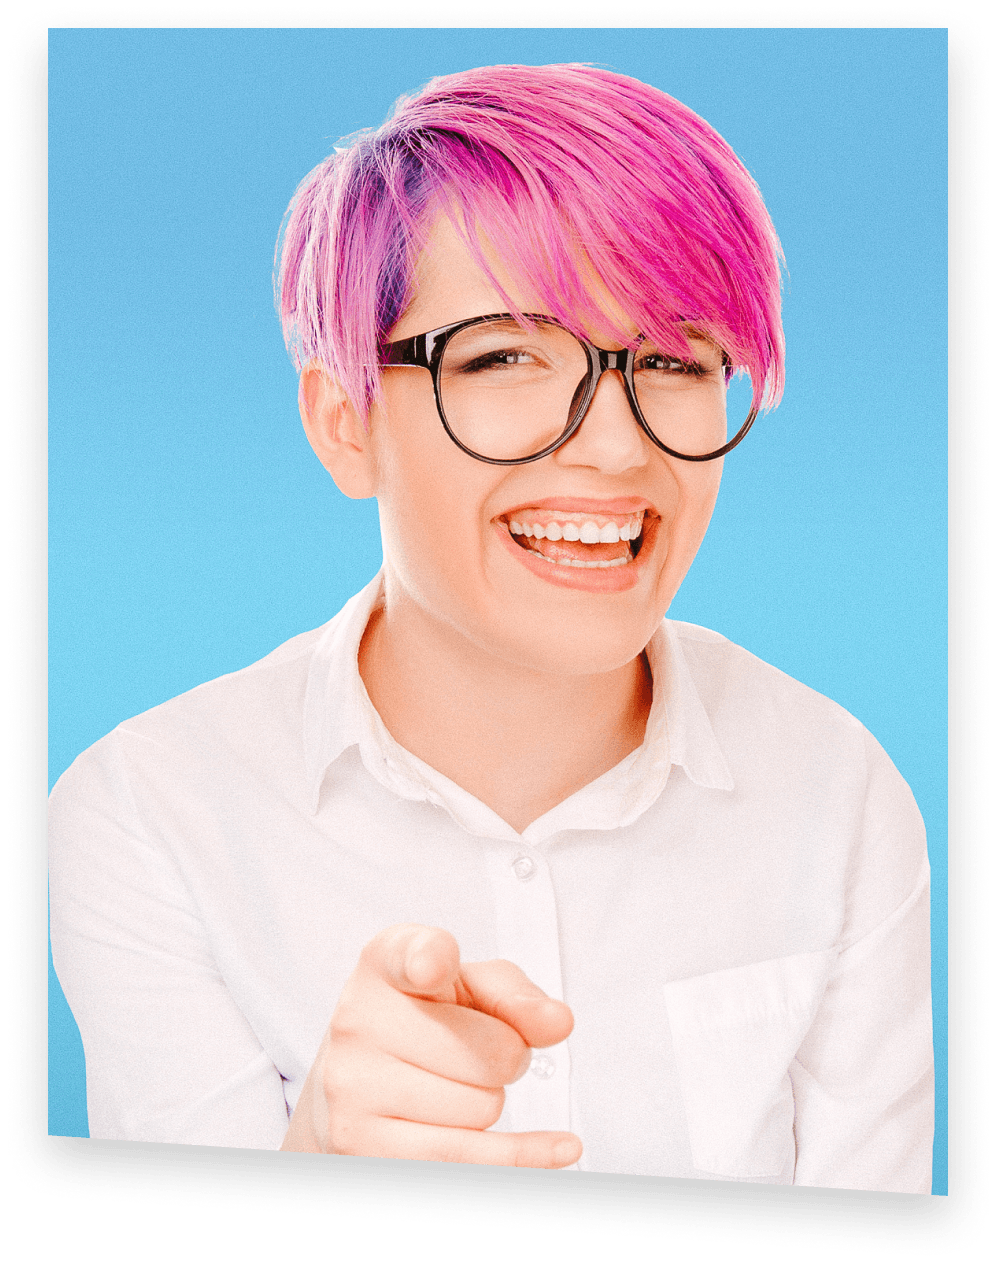 Shmoop student with magenta hair cheerfully pointing at you 